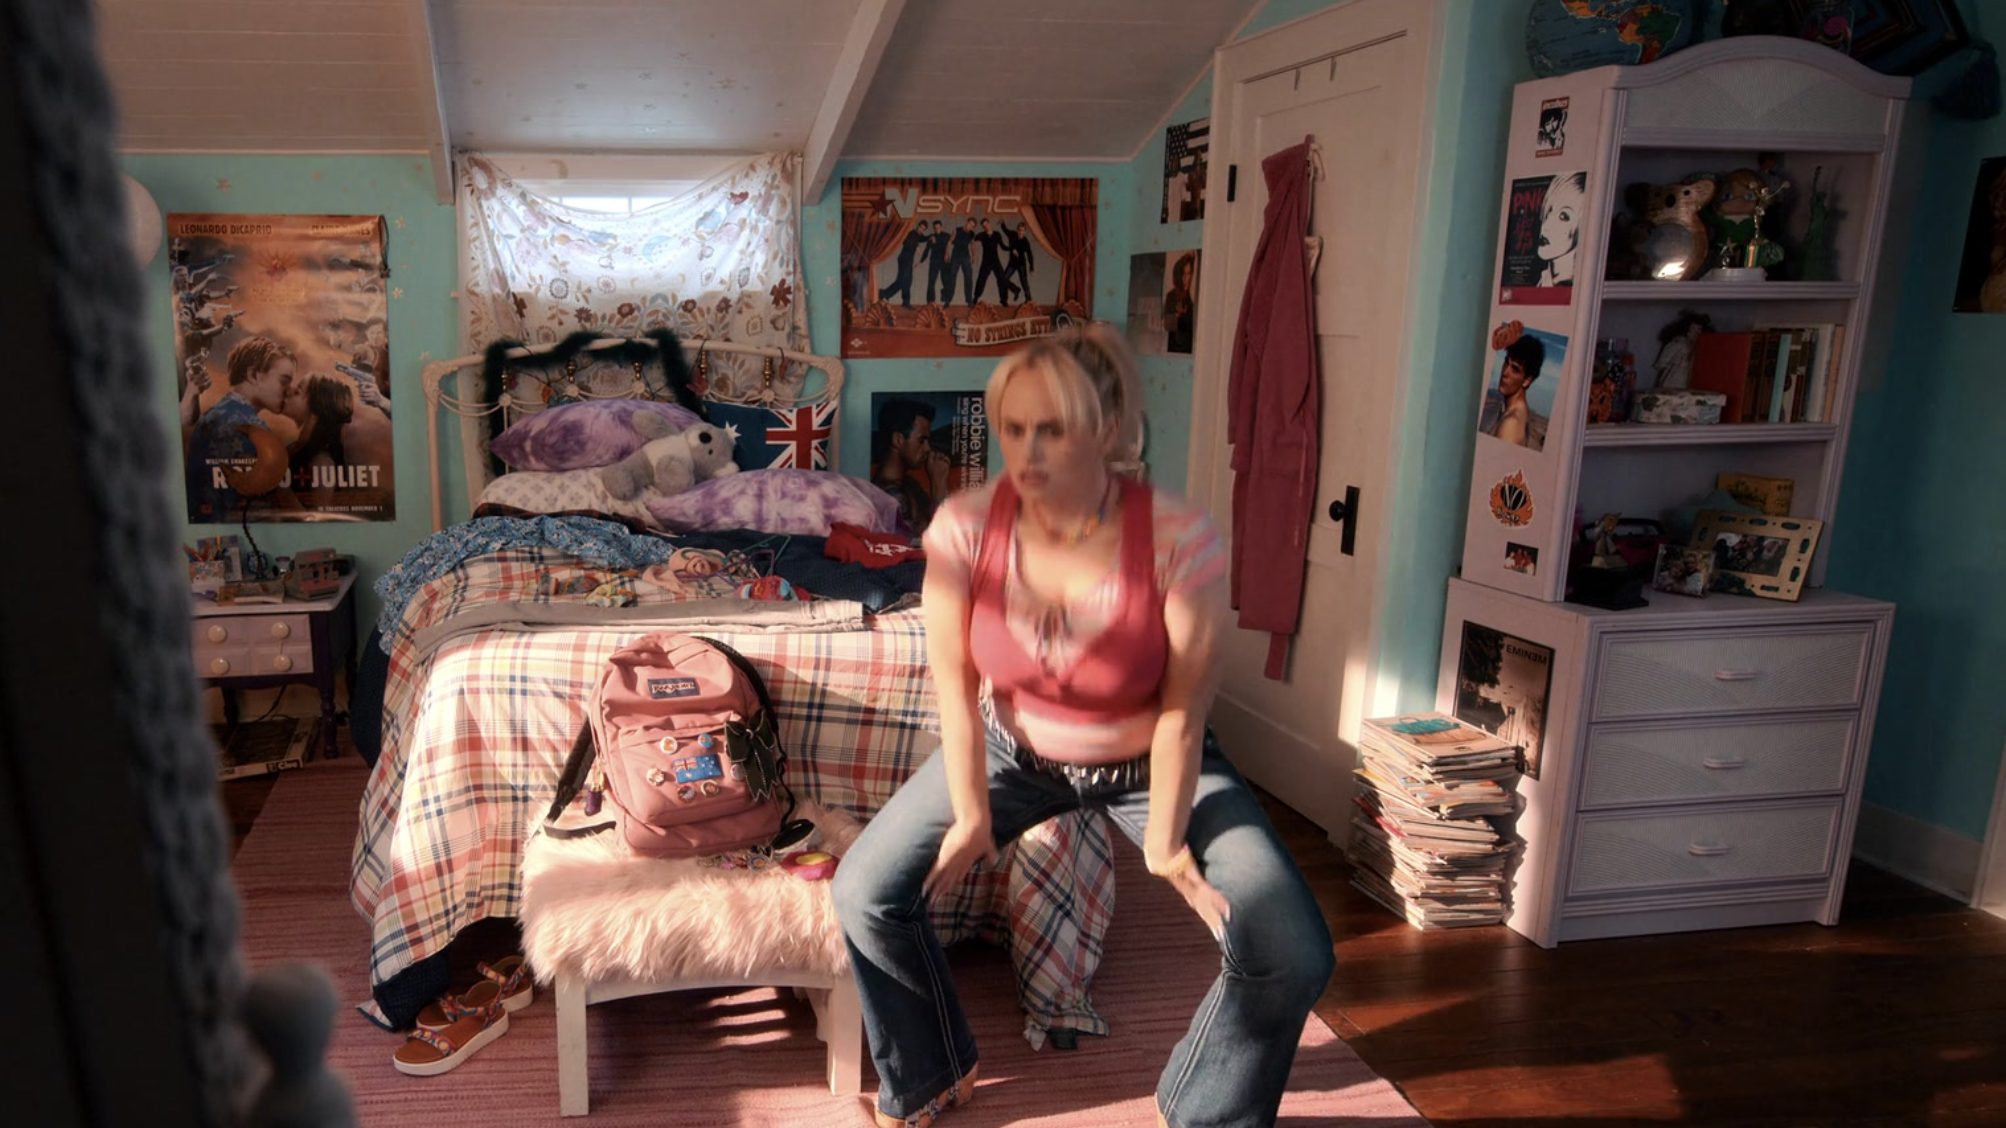 Rebel as Stephanie sitting on her bed with posters on her bedroom wall